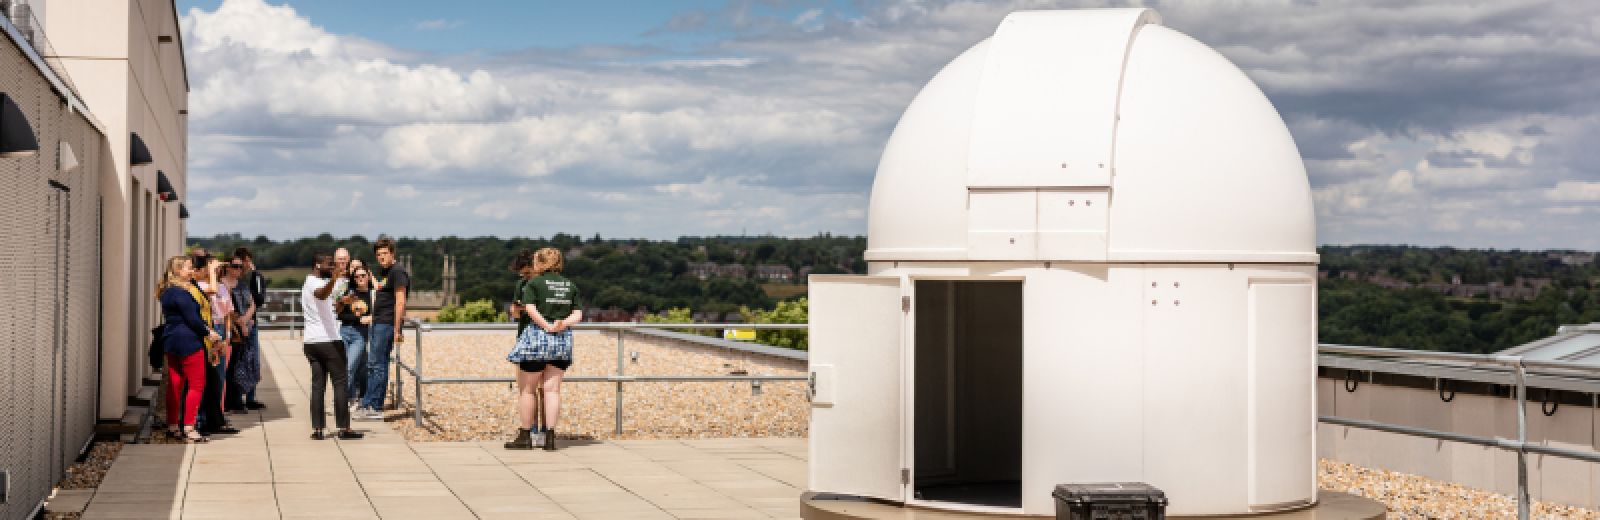 Students at Physics open day at the observatory